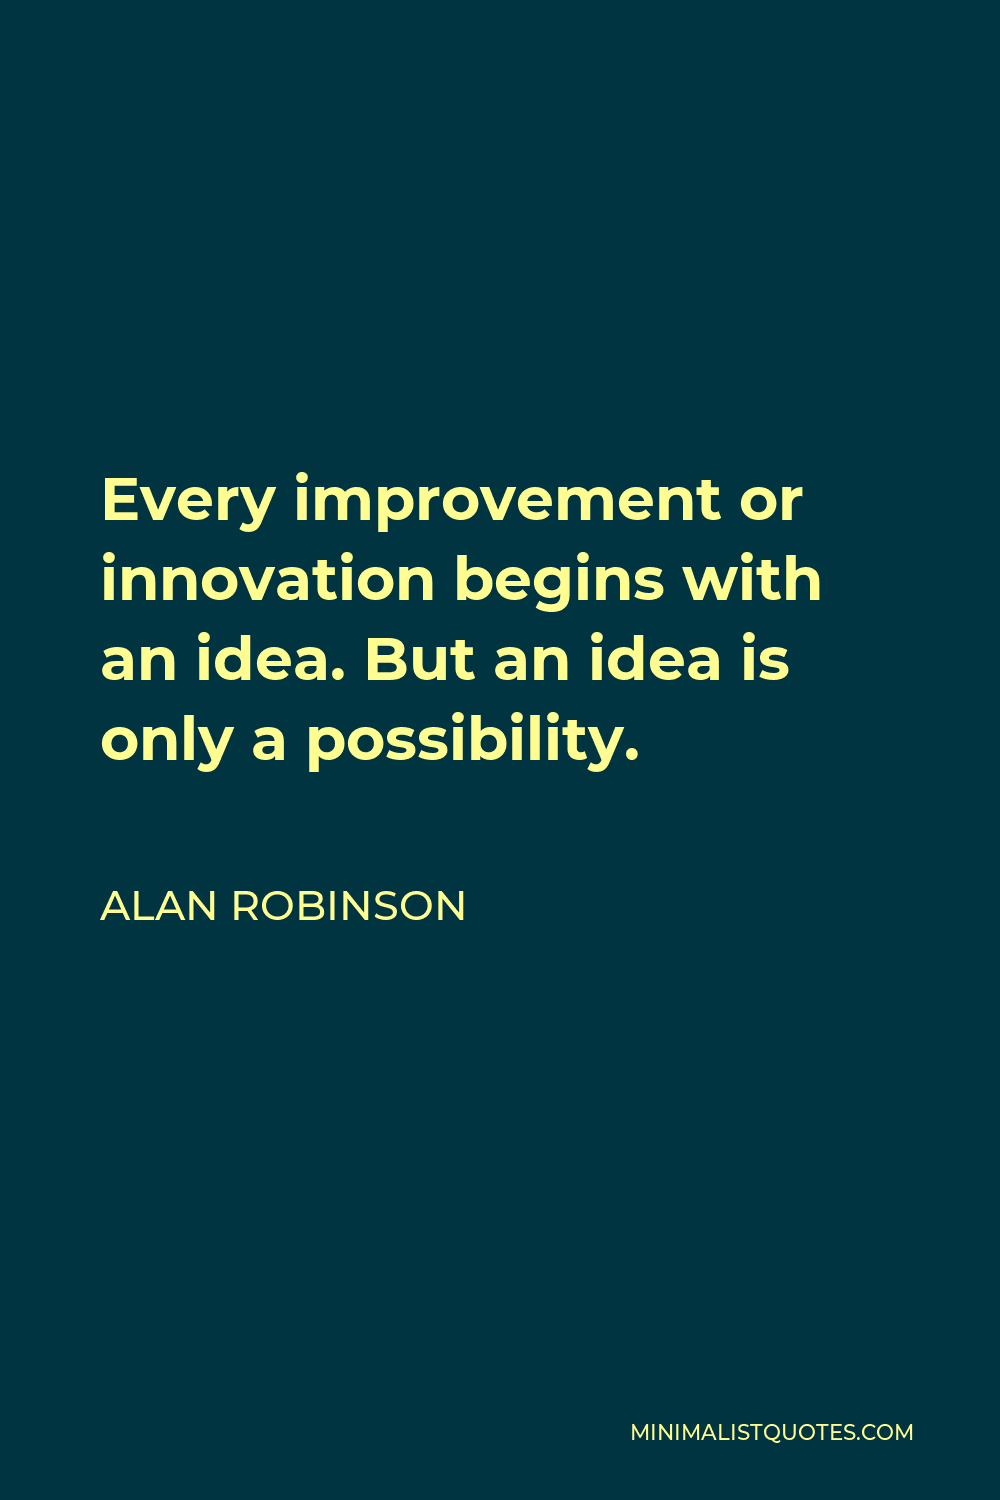 Alan Robinson Quote - Every improvement or innovation begins with an idea. But an idea is only a possibility.